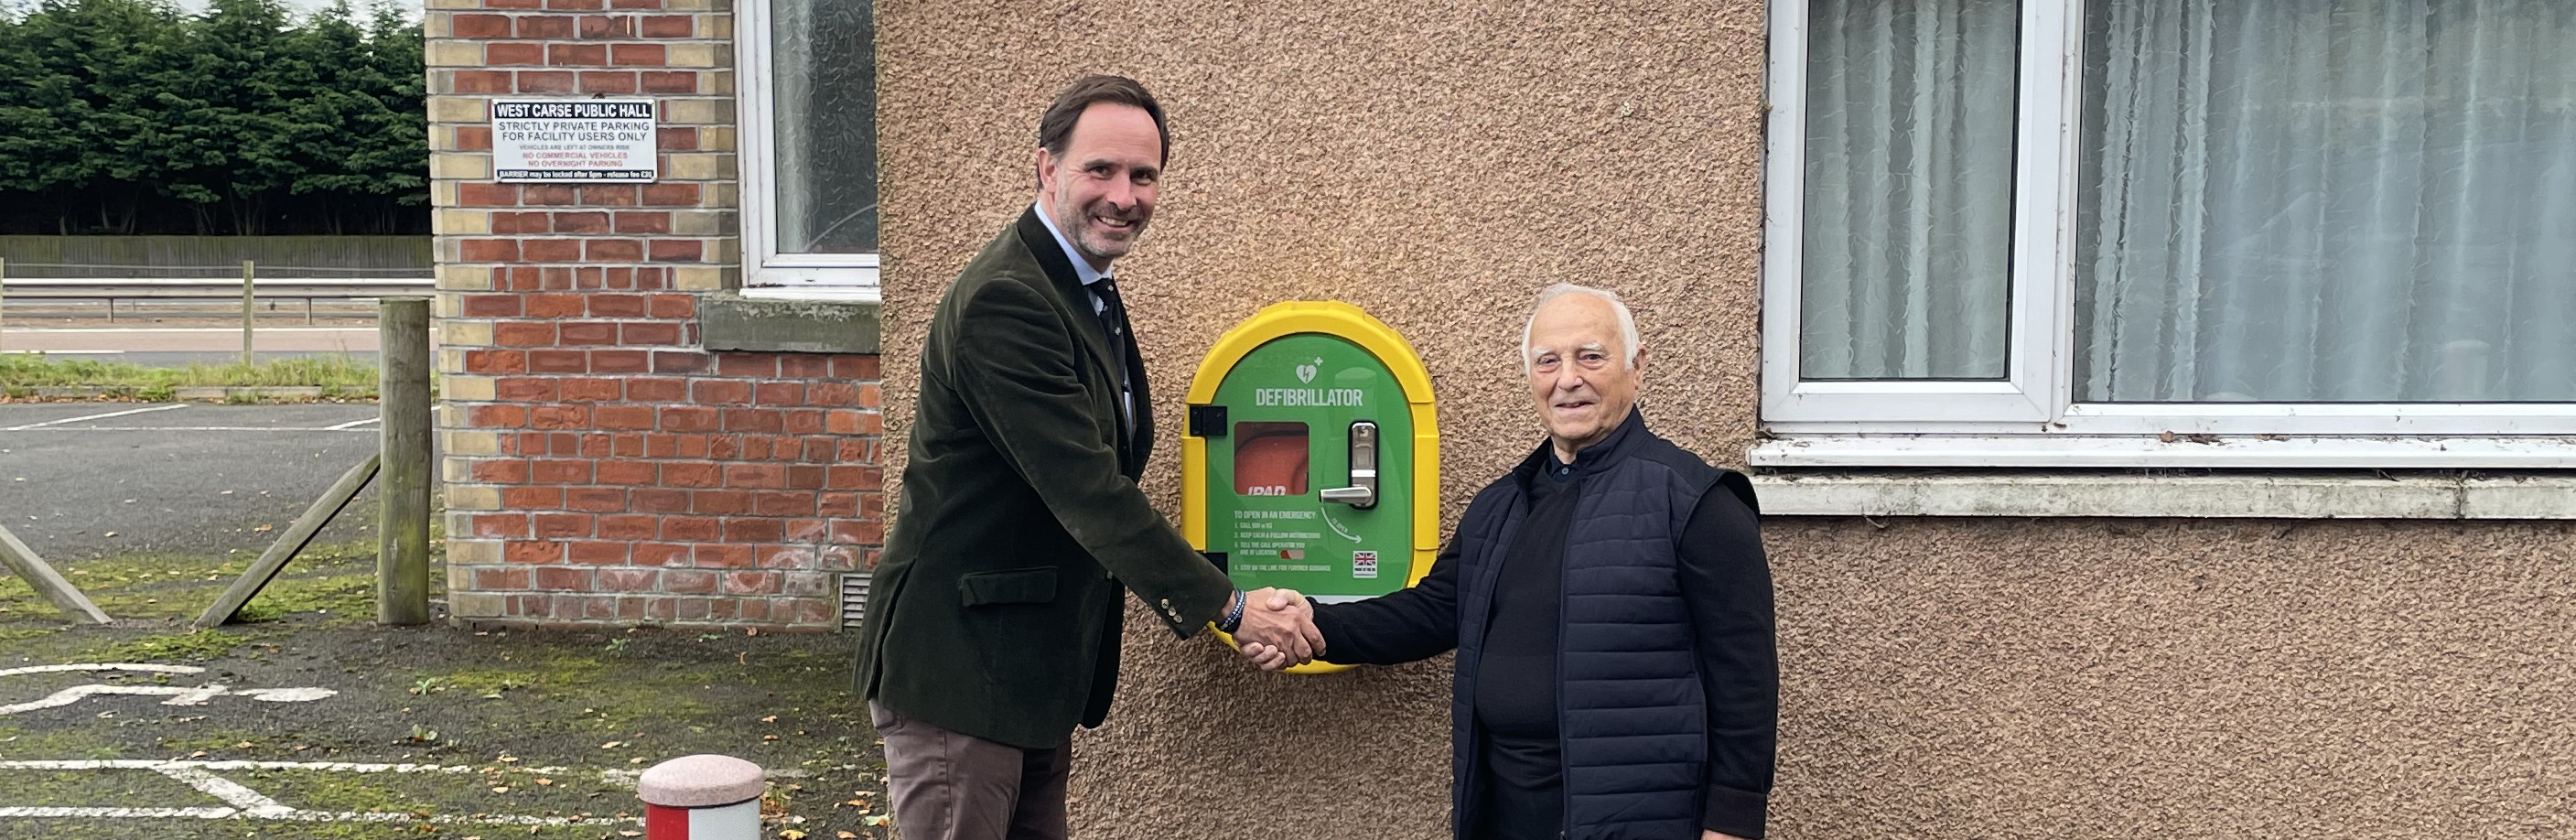 Two men shake hands in front of Public Access Defibrillator